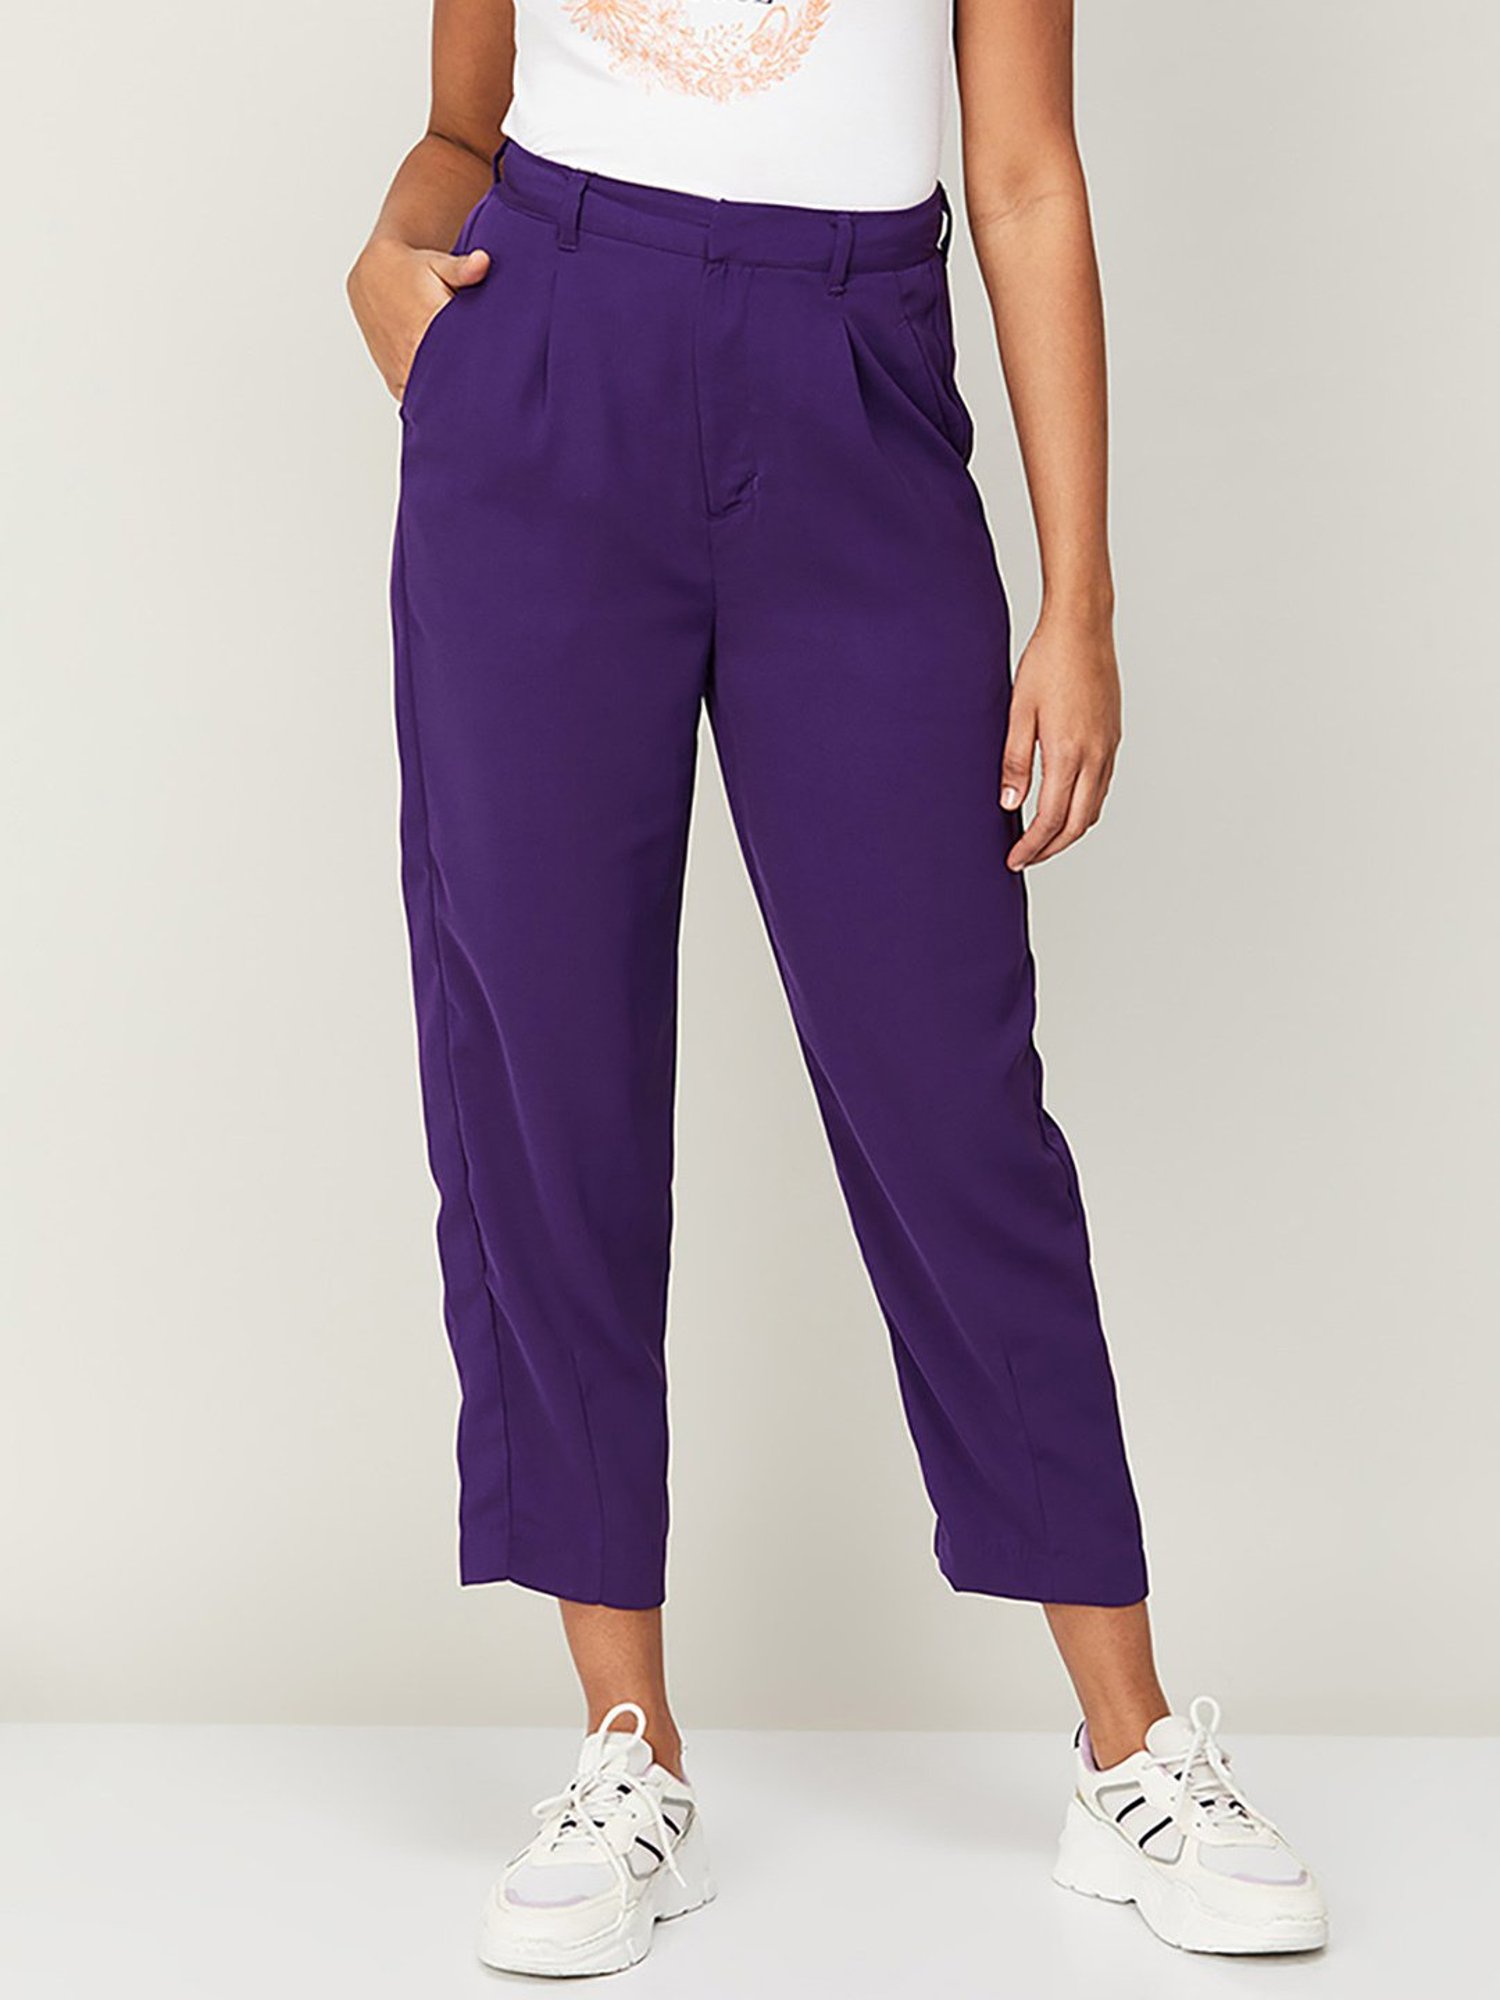 Womens Cropped  Capri Pants  Explore our New Arrivals  ZARA United  States